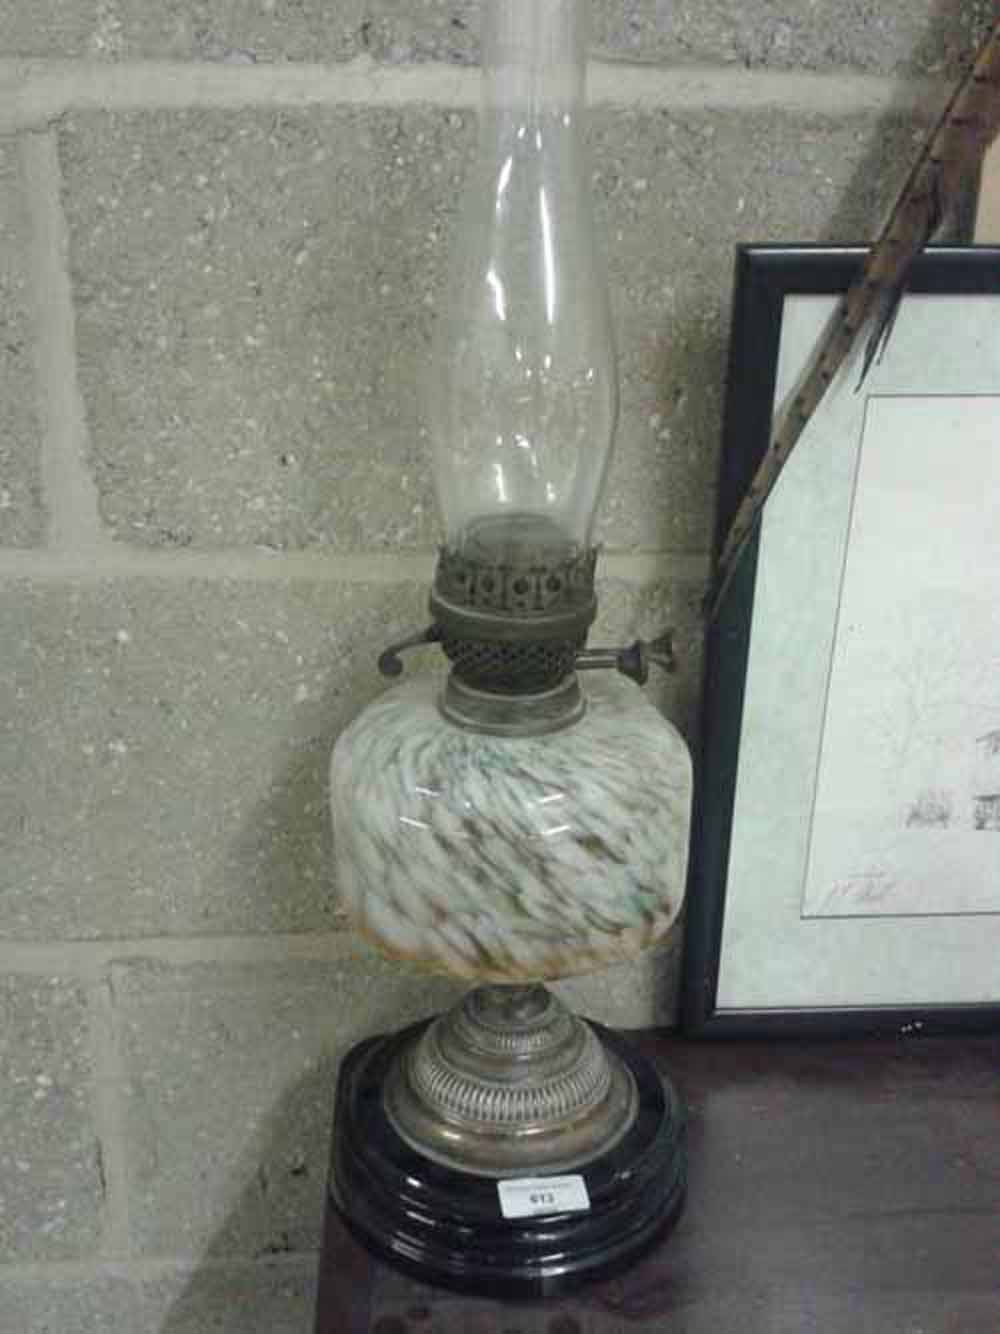 A Victorian/Edwardian oil lamp with mottled glass font - metal pedestal in need of straightening